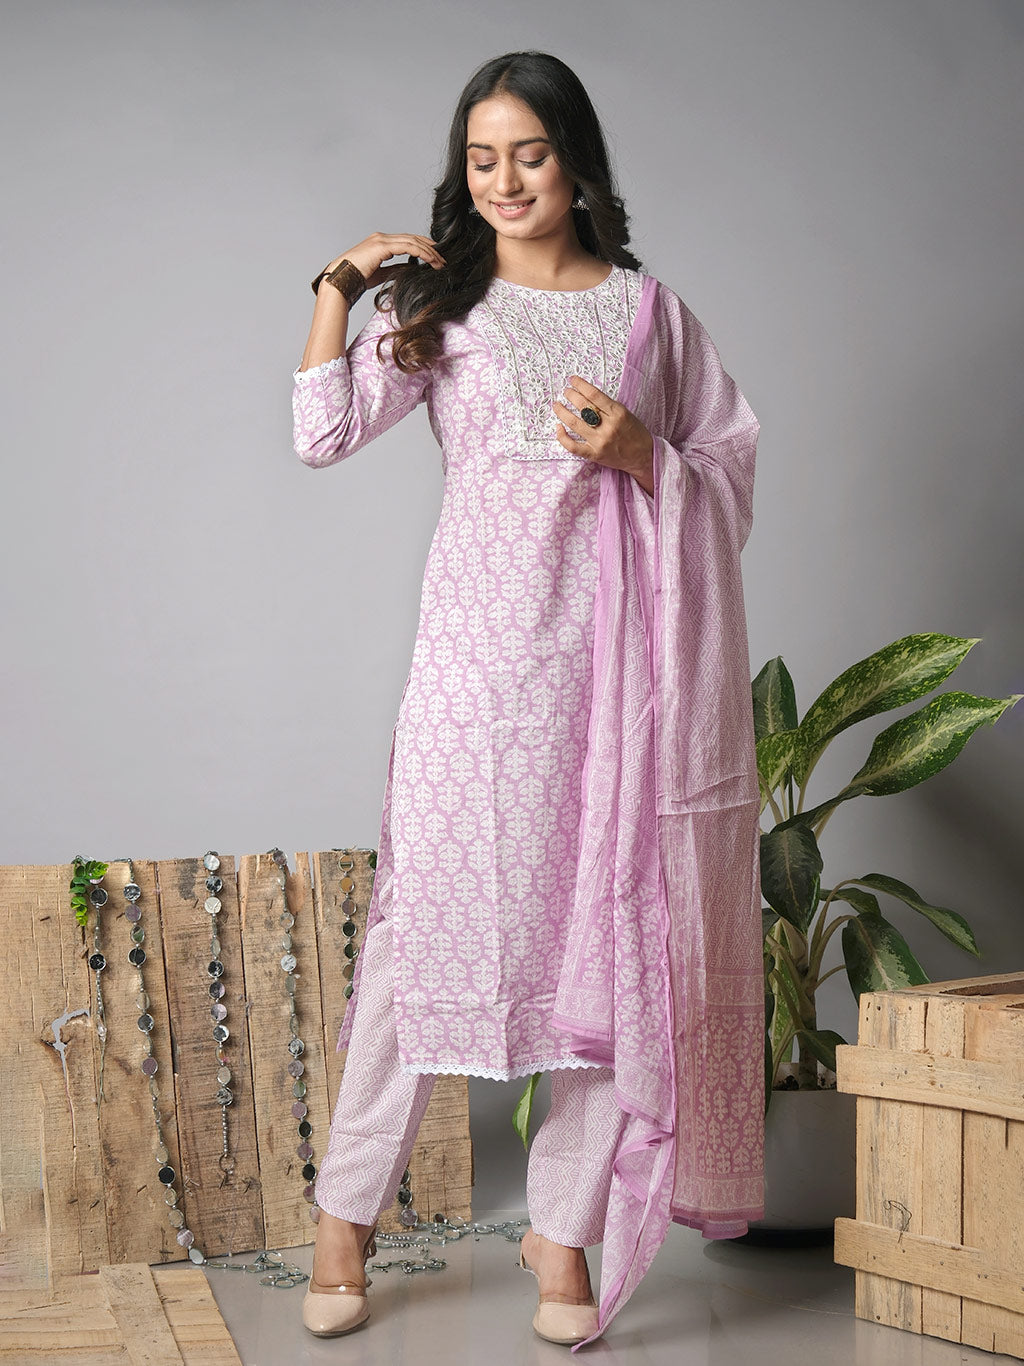 Baby Pink kurta set with dupatta, another front view